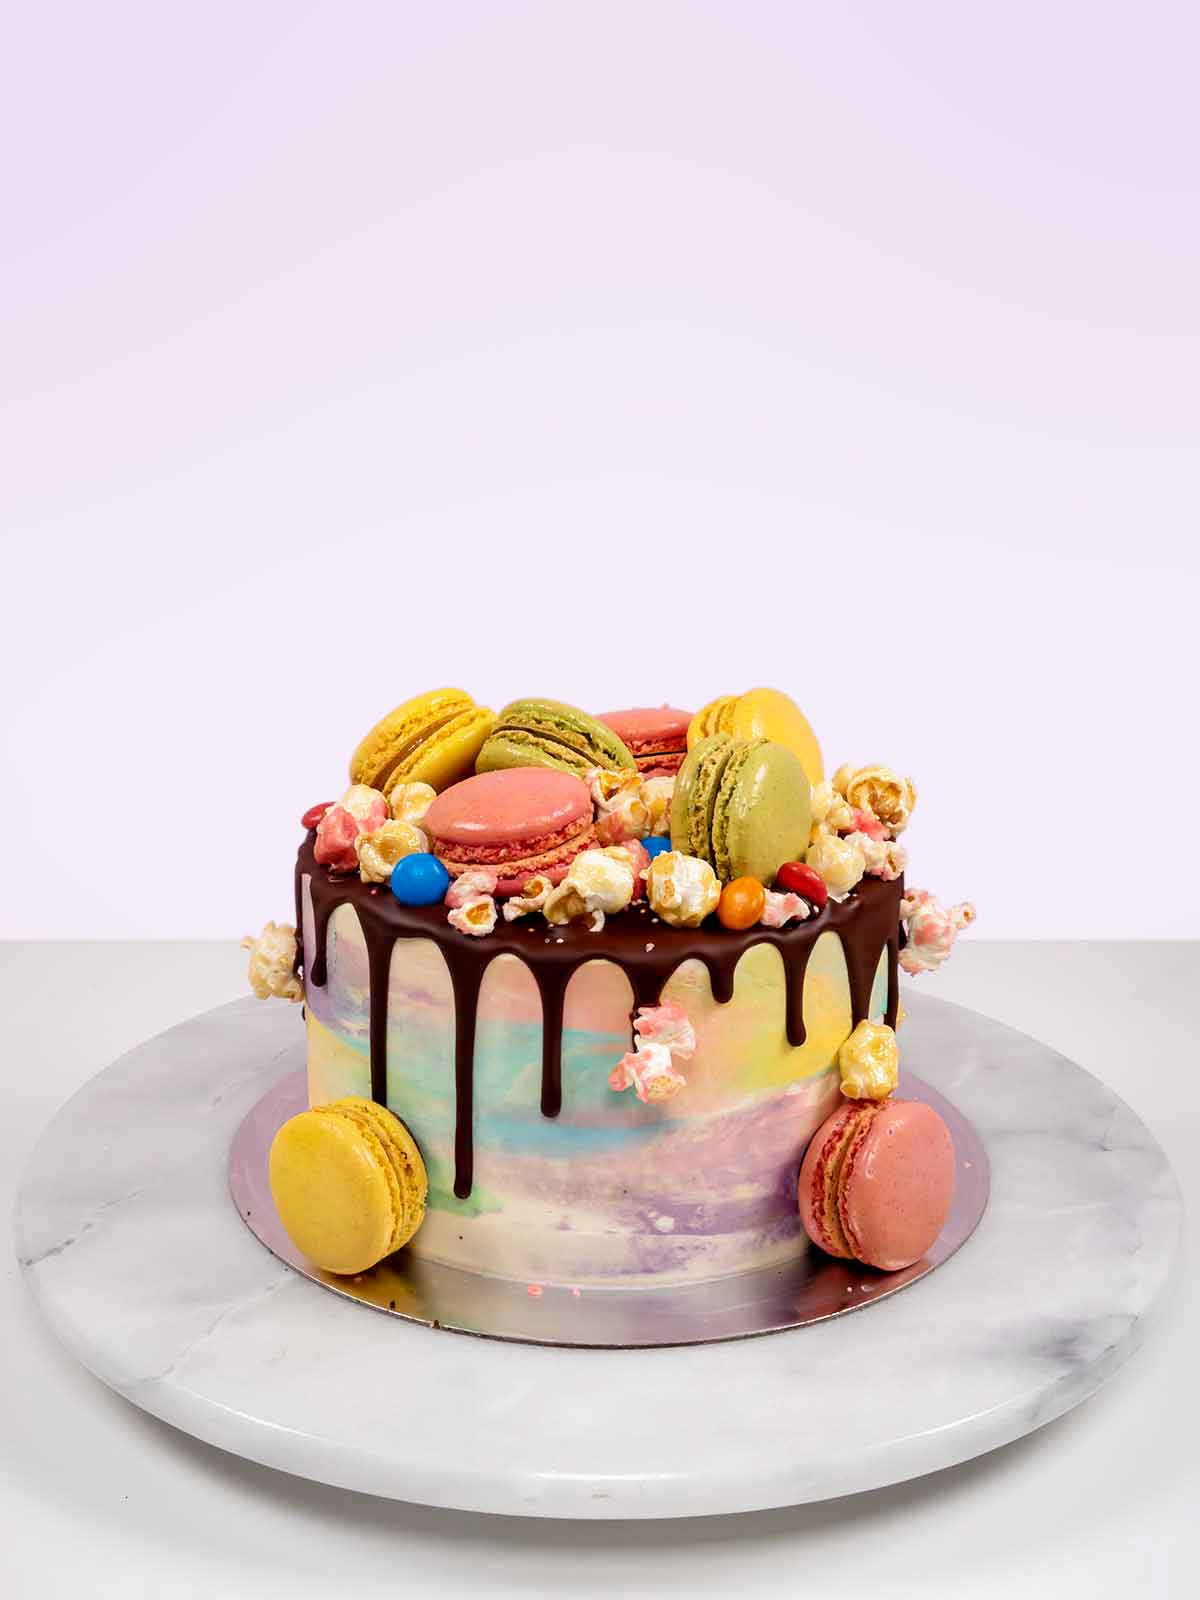 10+ cake decorated with macarons and flowers ideas for elegant cakes